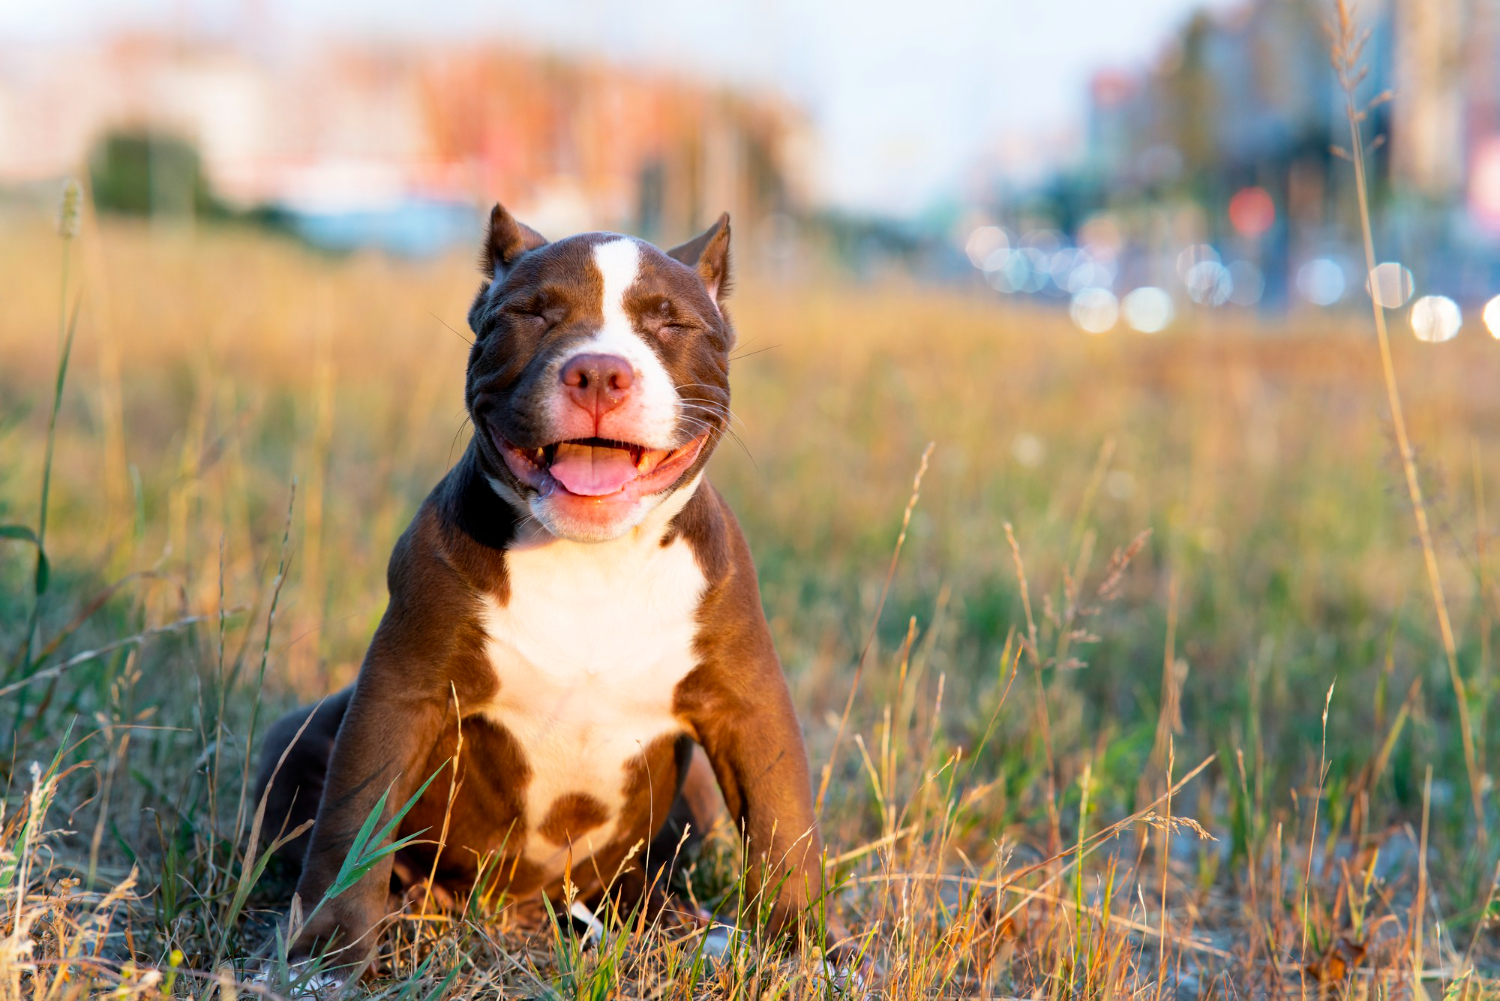 What dog body harness to choose for a pitbull?